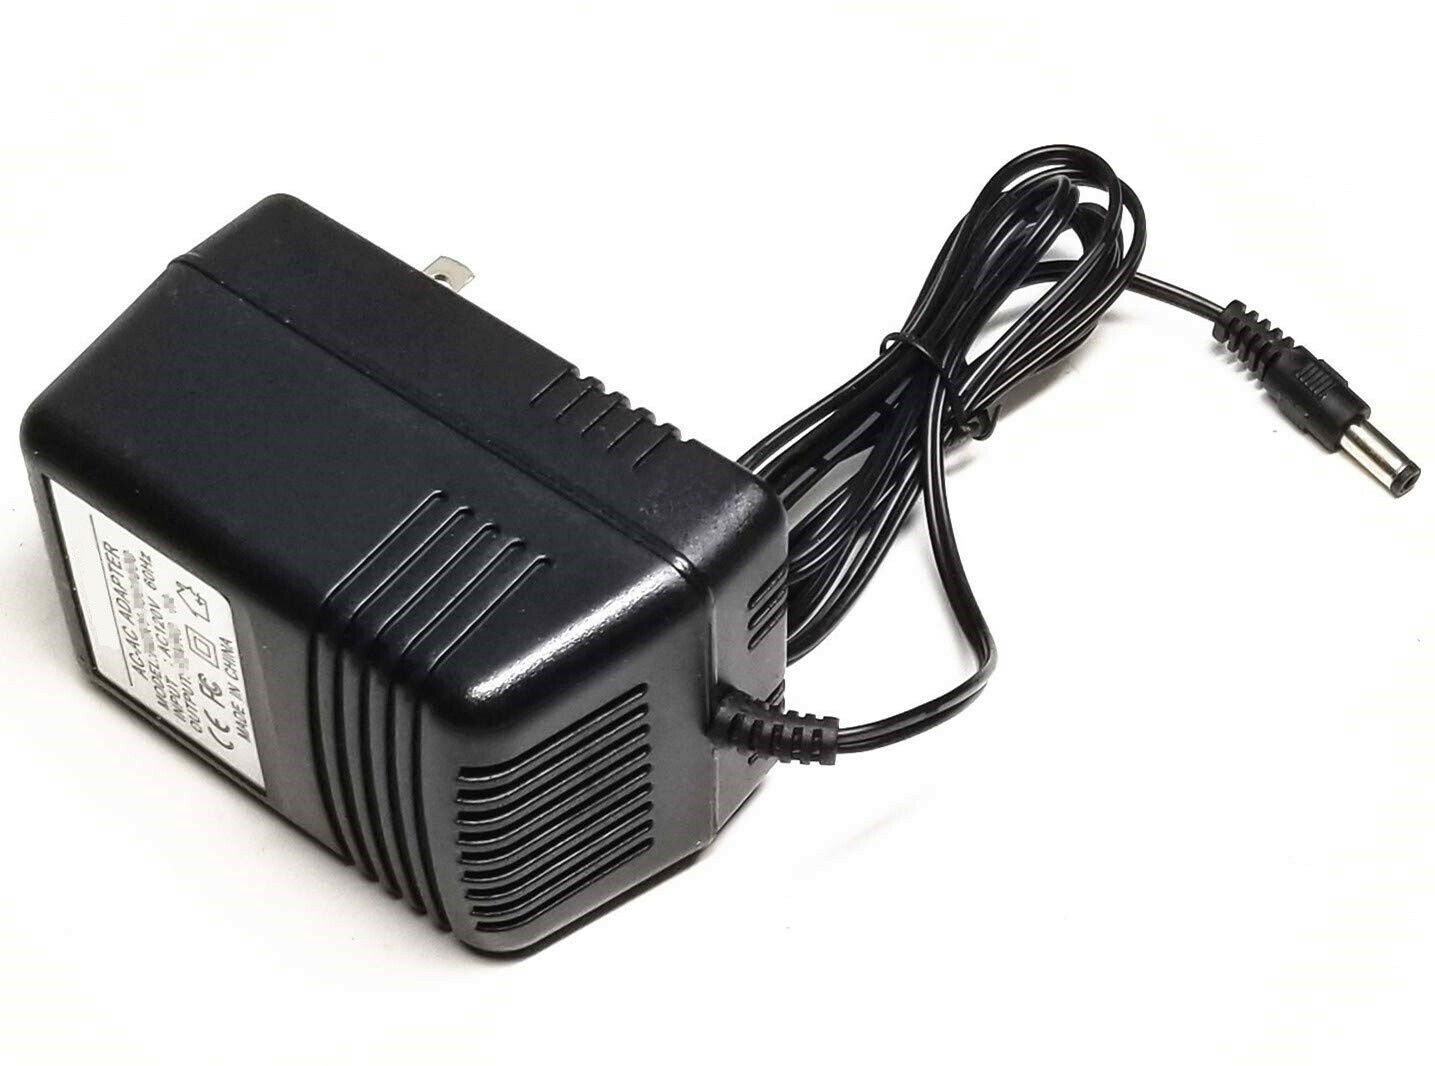 AC Adapter DC Power Supply For Insignia NS-DXA2 Digital Analog TV Converter Box Note: Please make sure the DC